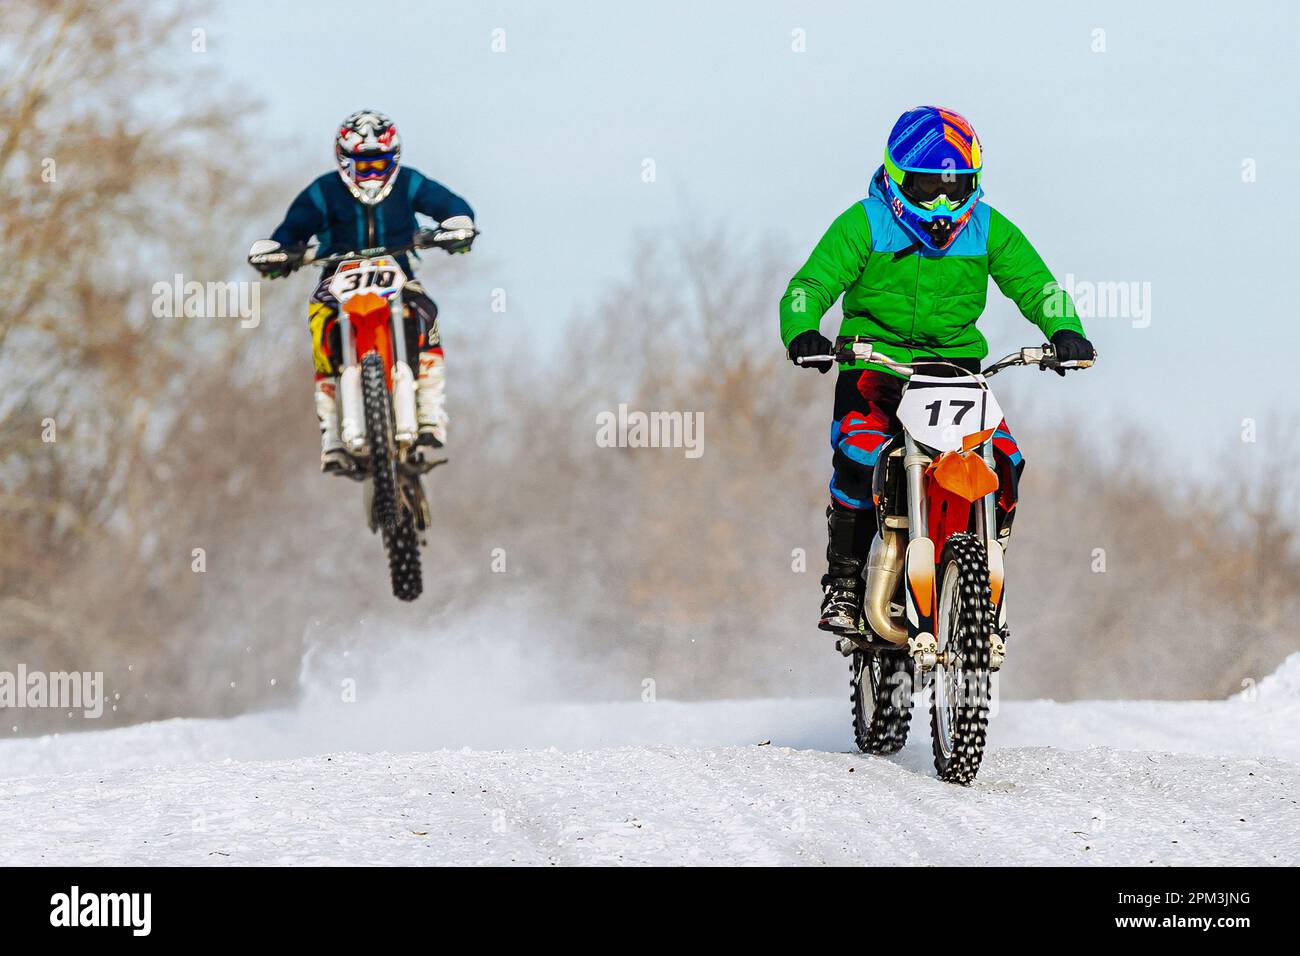 two motocross rider riding winter off-road motorcycle racing Stock Photo